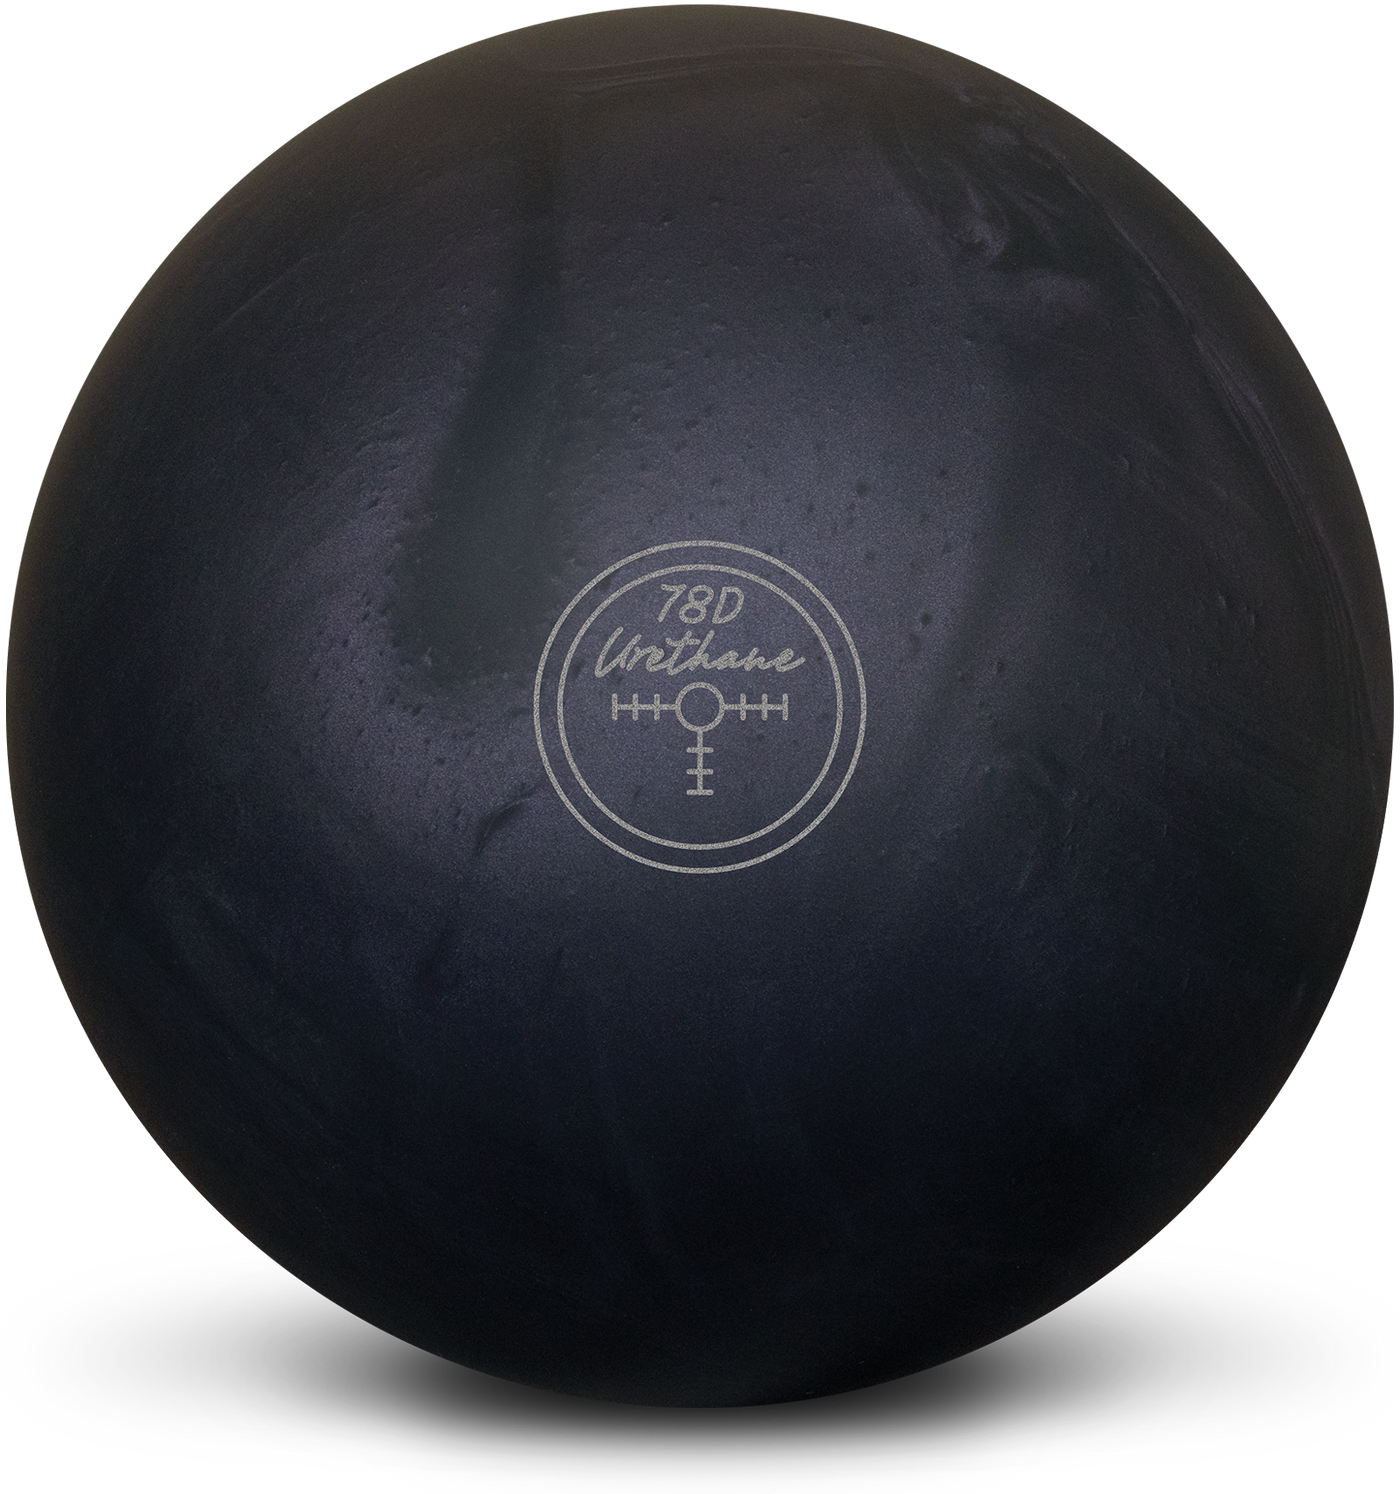 Black Pearl Urethane bowling ball showing the center of gravity marker